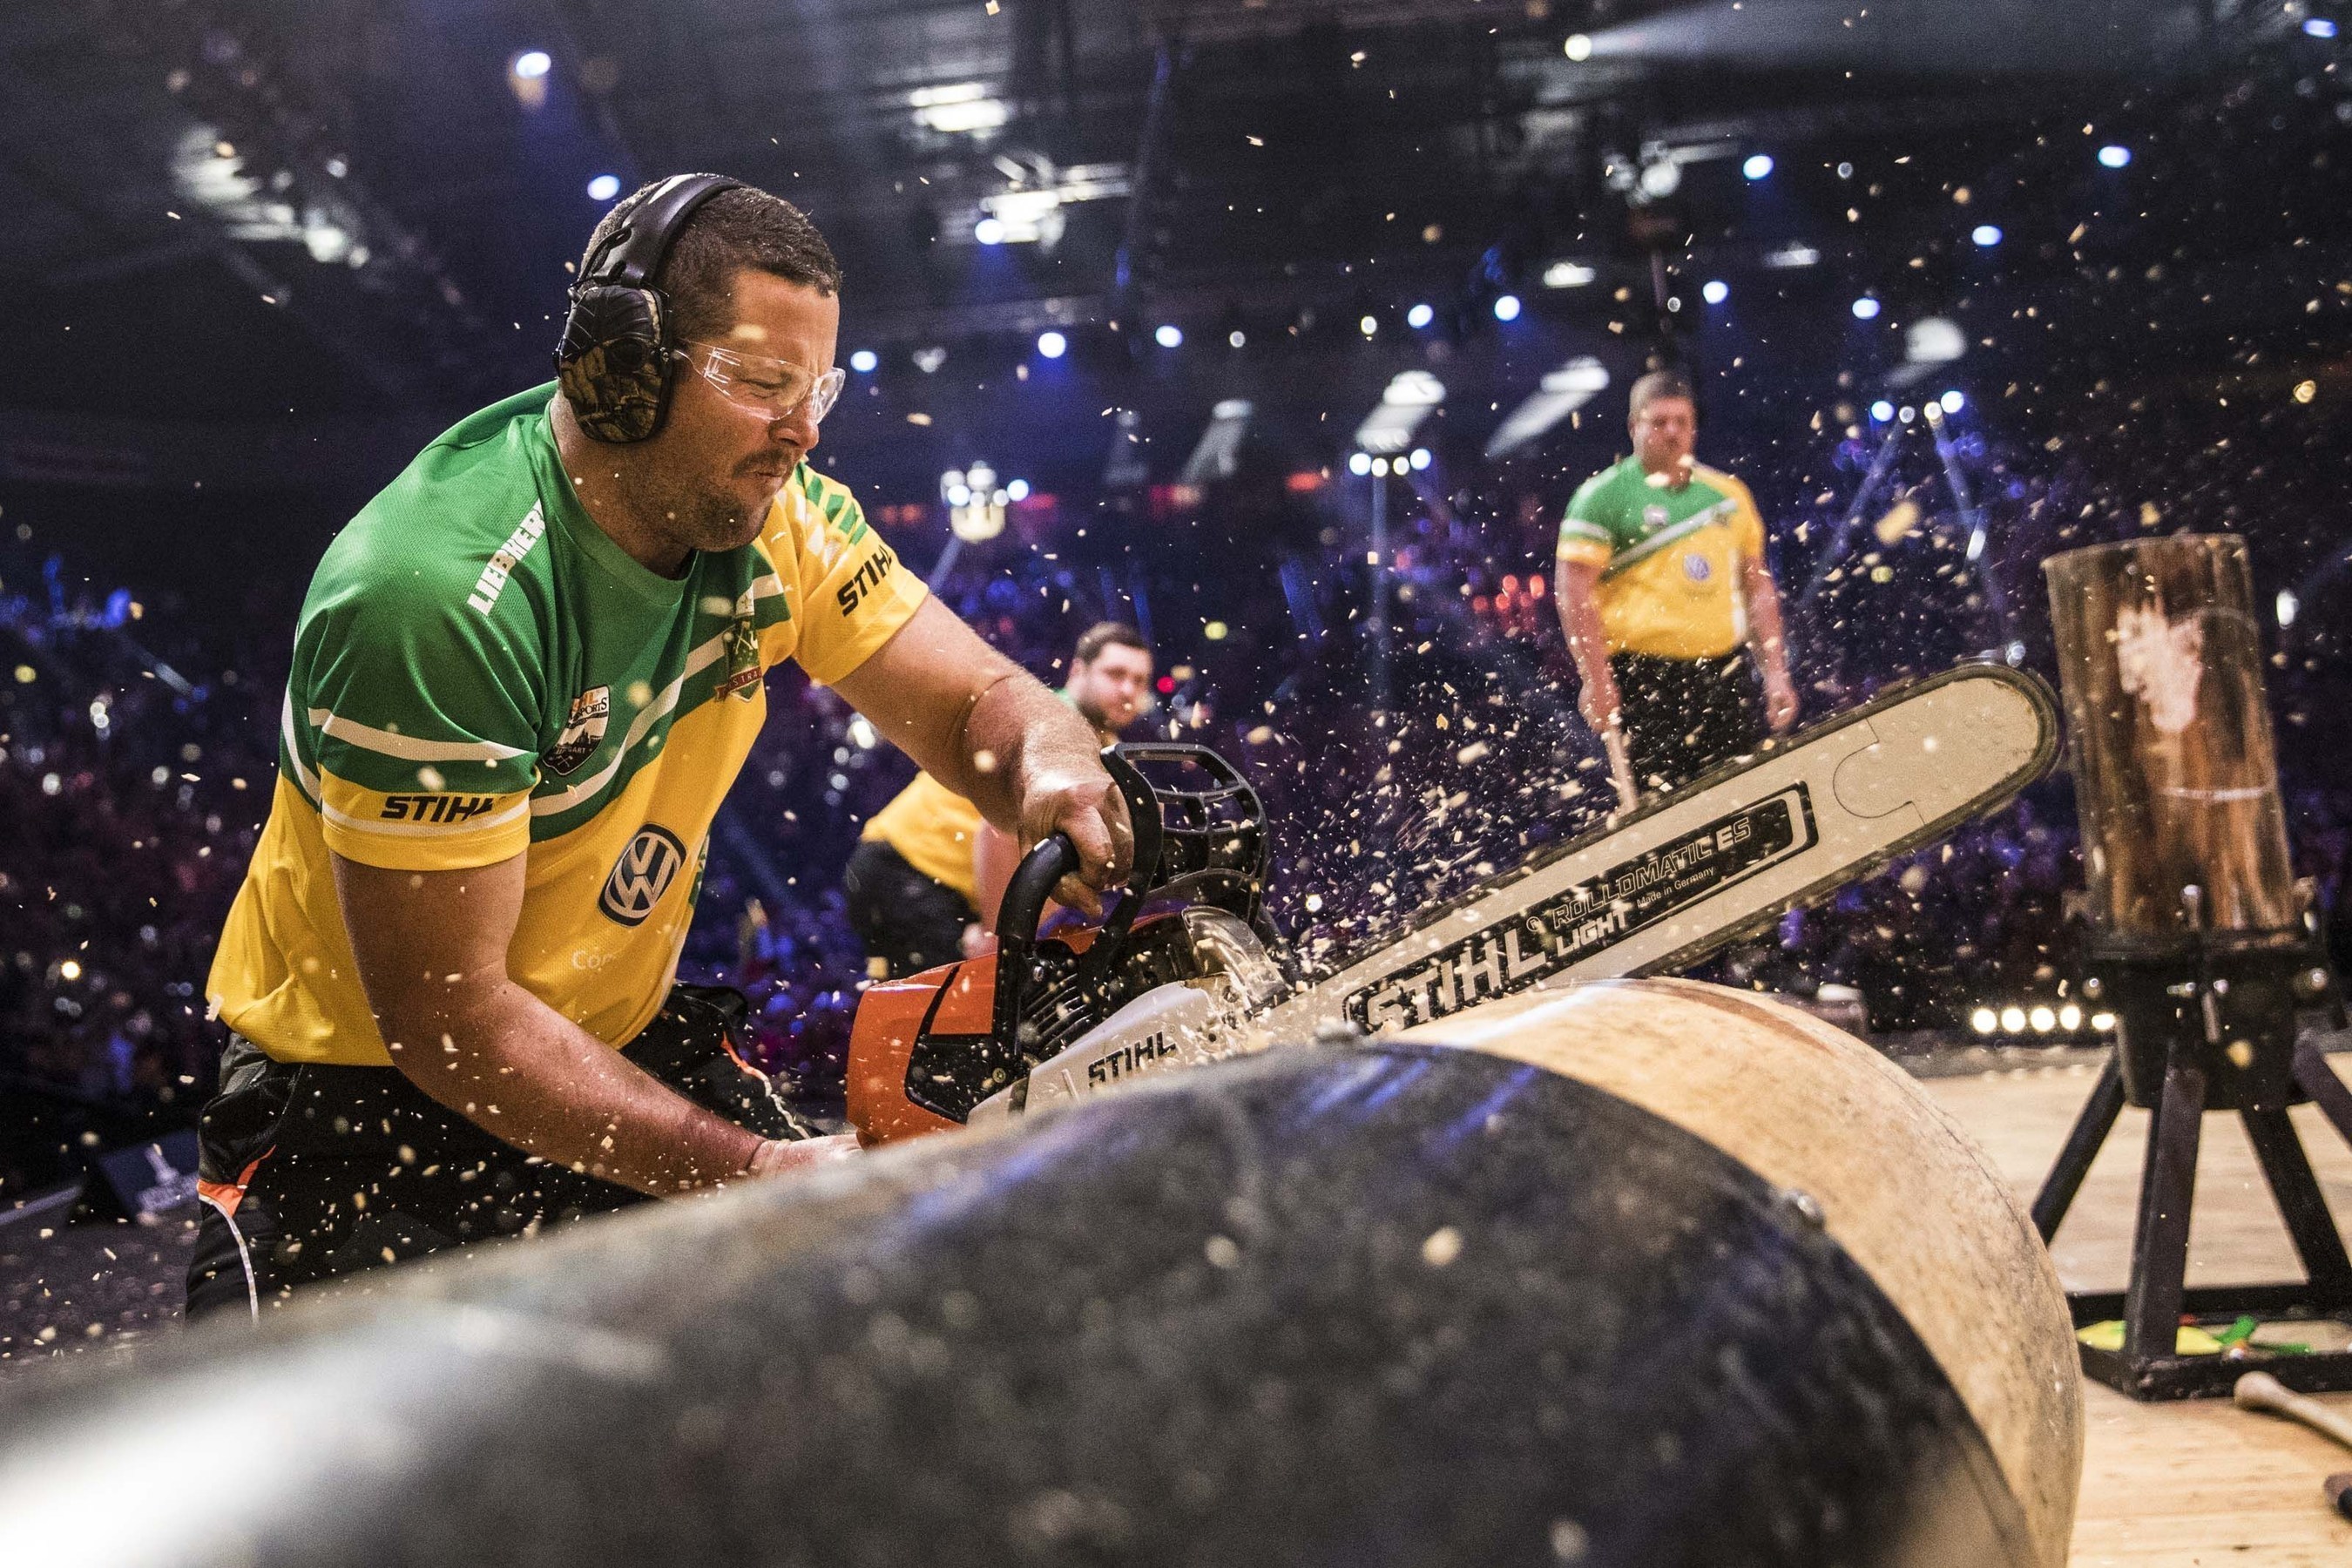 Already the day before the team race was on: Team Australia took a mere 46.45 seconds to demolish four big logs with the axe and saw, thus establishing a new world record. Hence, they became the new Team World Champions in the end. (PRNewsFoto/STIHL TIMBERSPORTS Series)